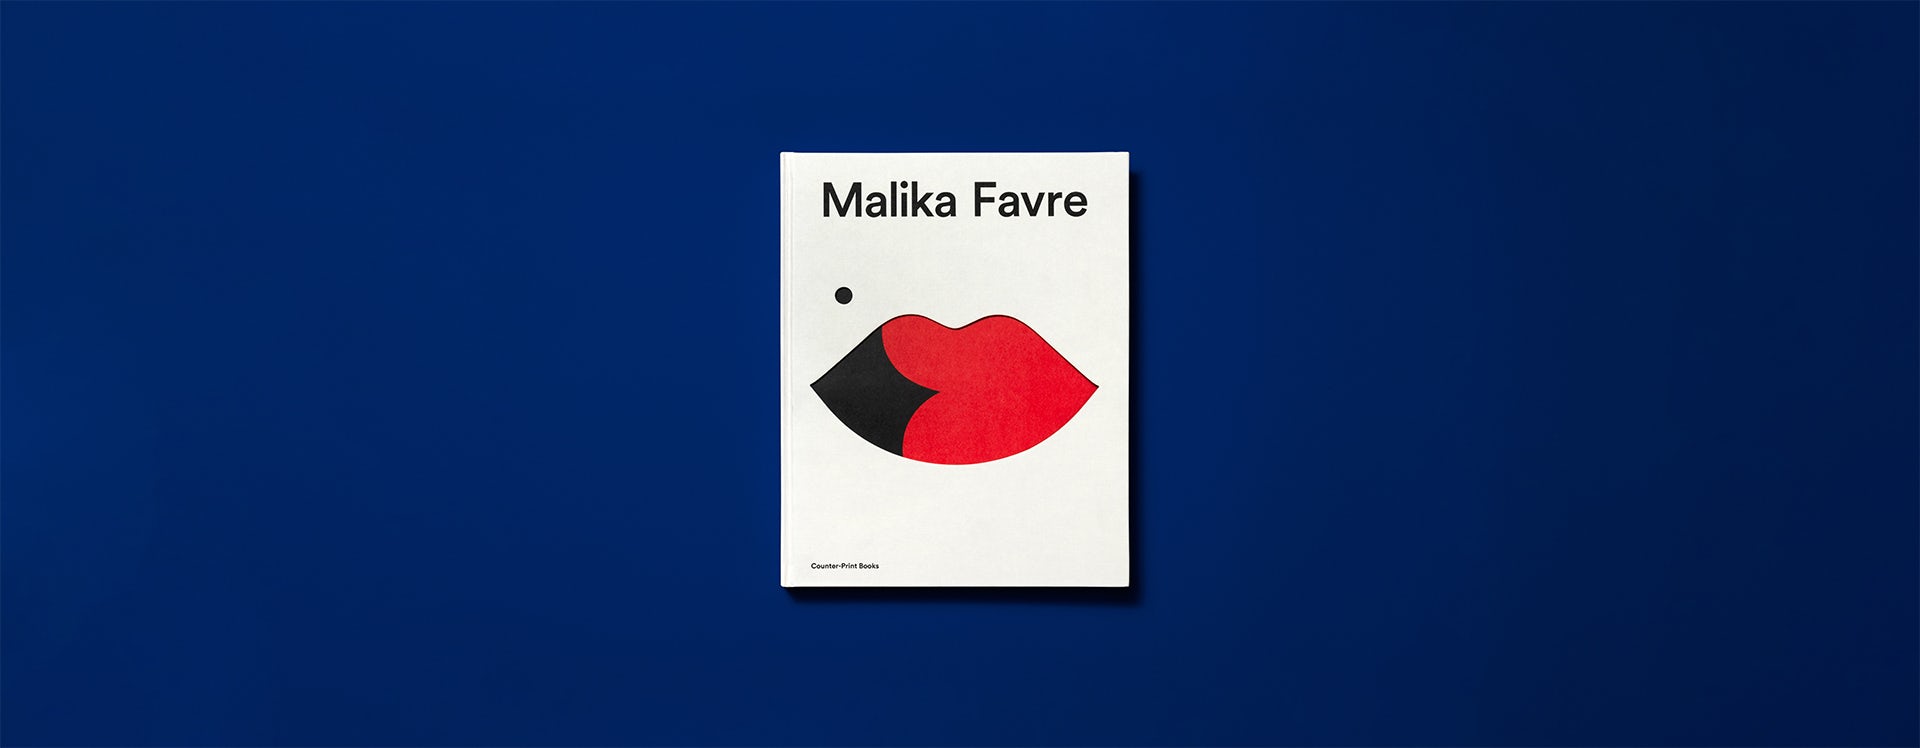 Malika Favre's “Connected”